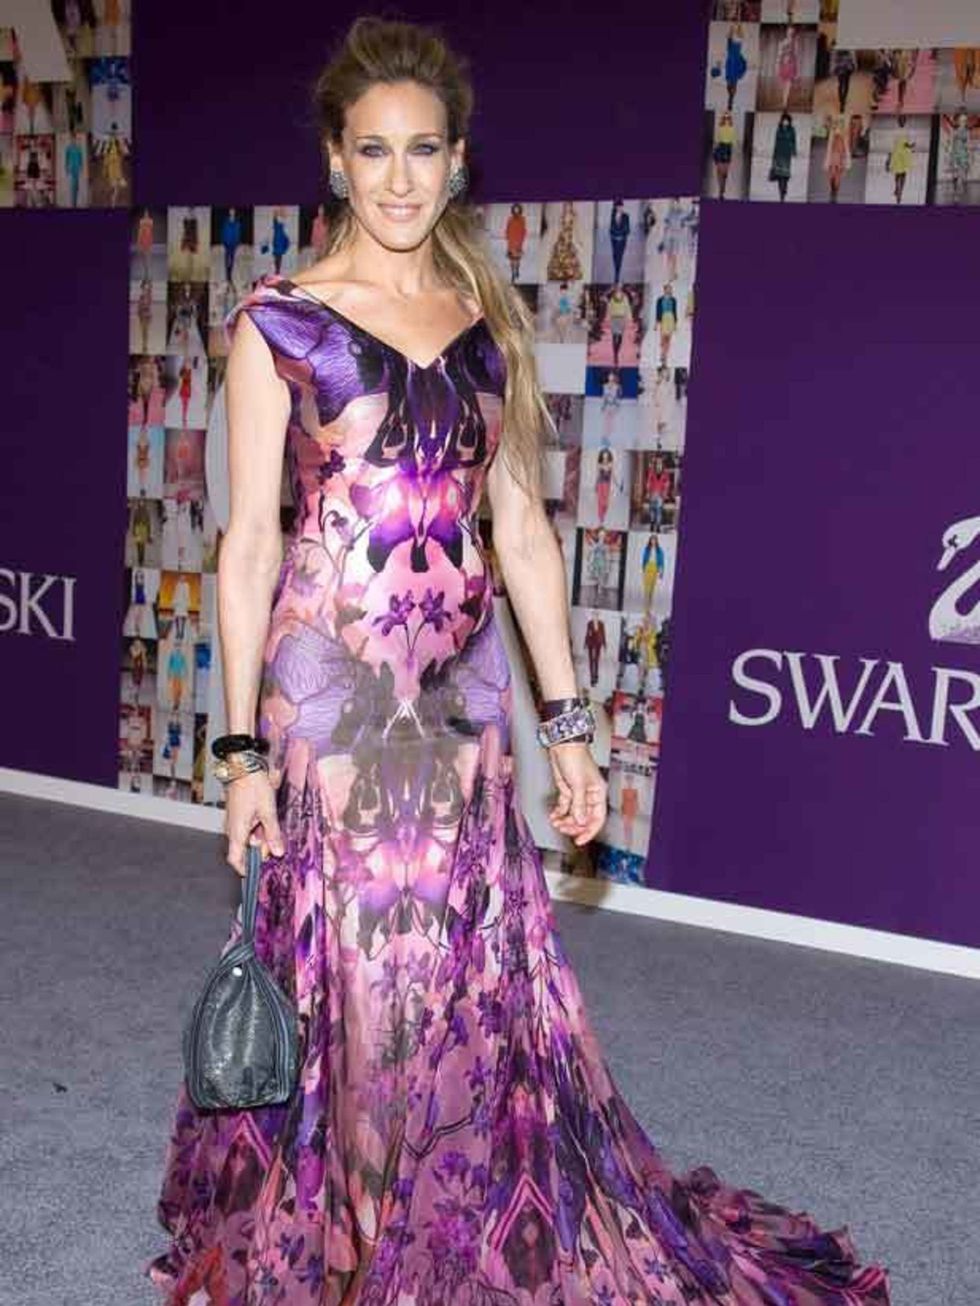 <p><a href="http://www.elleuk.com/starstyle/style-files/%28section%29/Sarah-Jessica-Parker">Sarah Jessica Parker</a> at the <a href="http://www.elleuk.com/starstyle/red-carpet/%28section%29/the-cfda-awards-2010">CFDA Awards</a>, 2010</p>